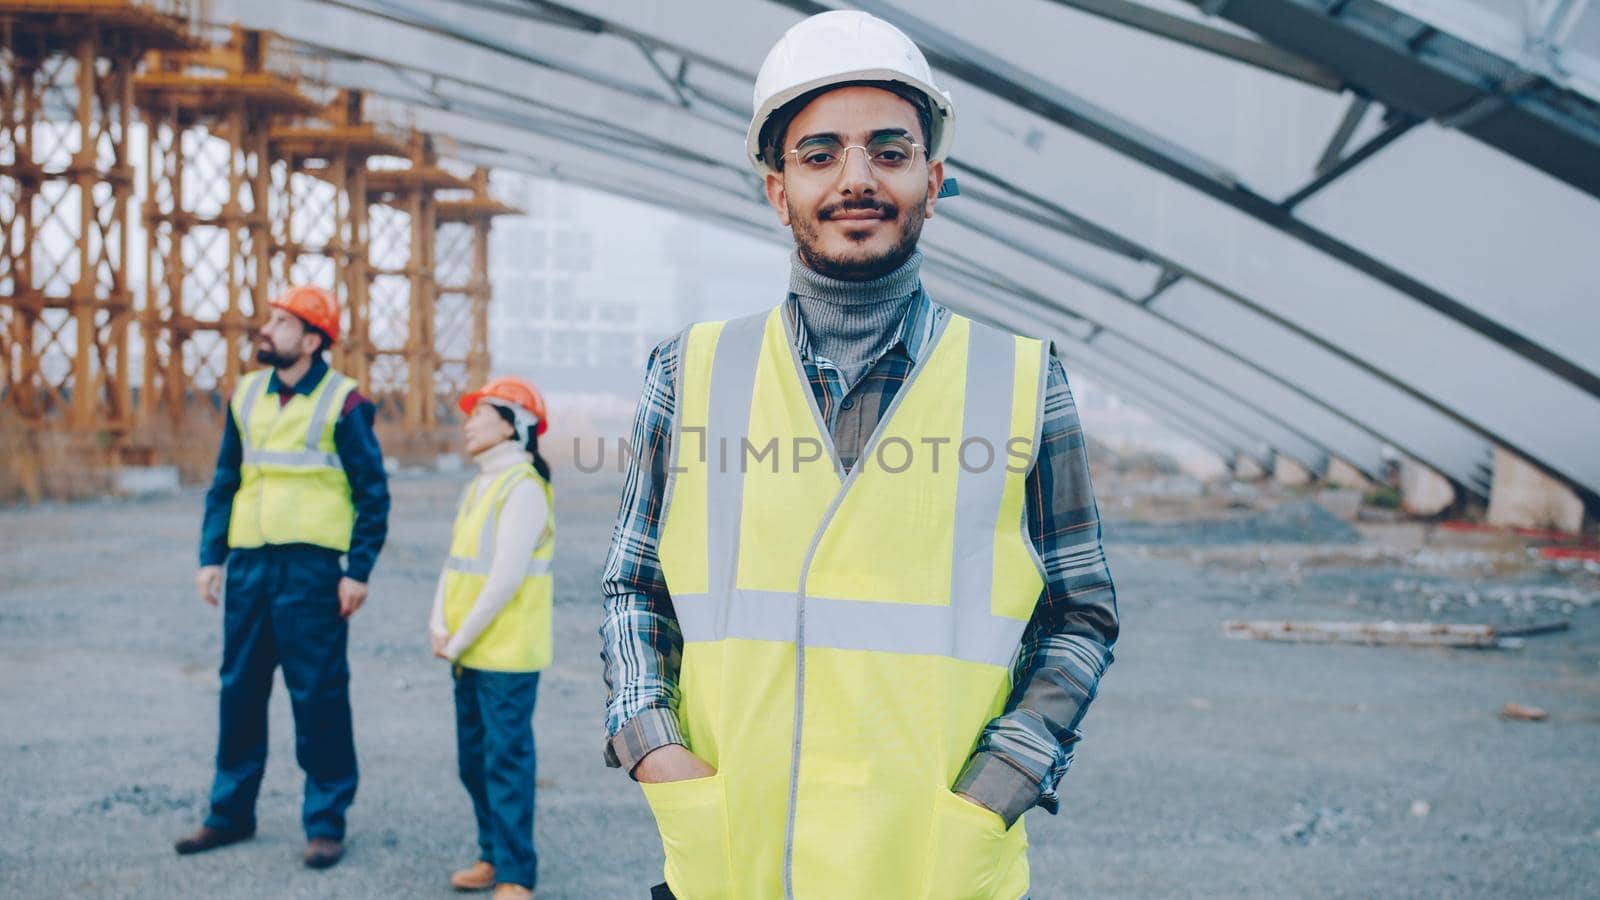 portrait of Arab man wearing safety helmet standing in construction site smiling looking at camera while people in uniform working in background